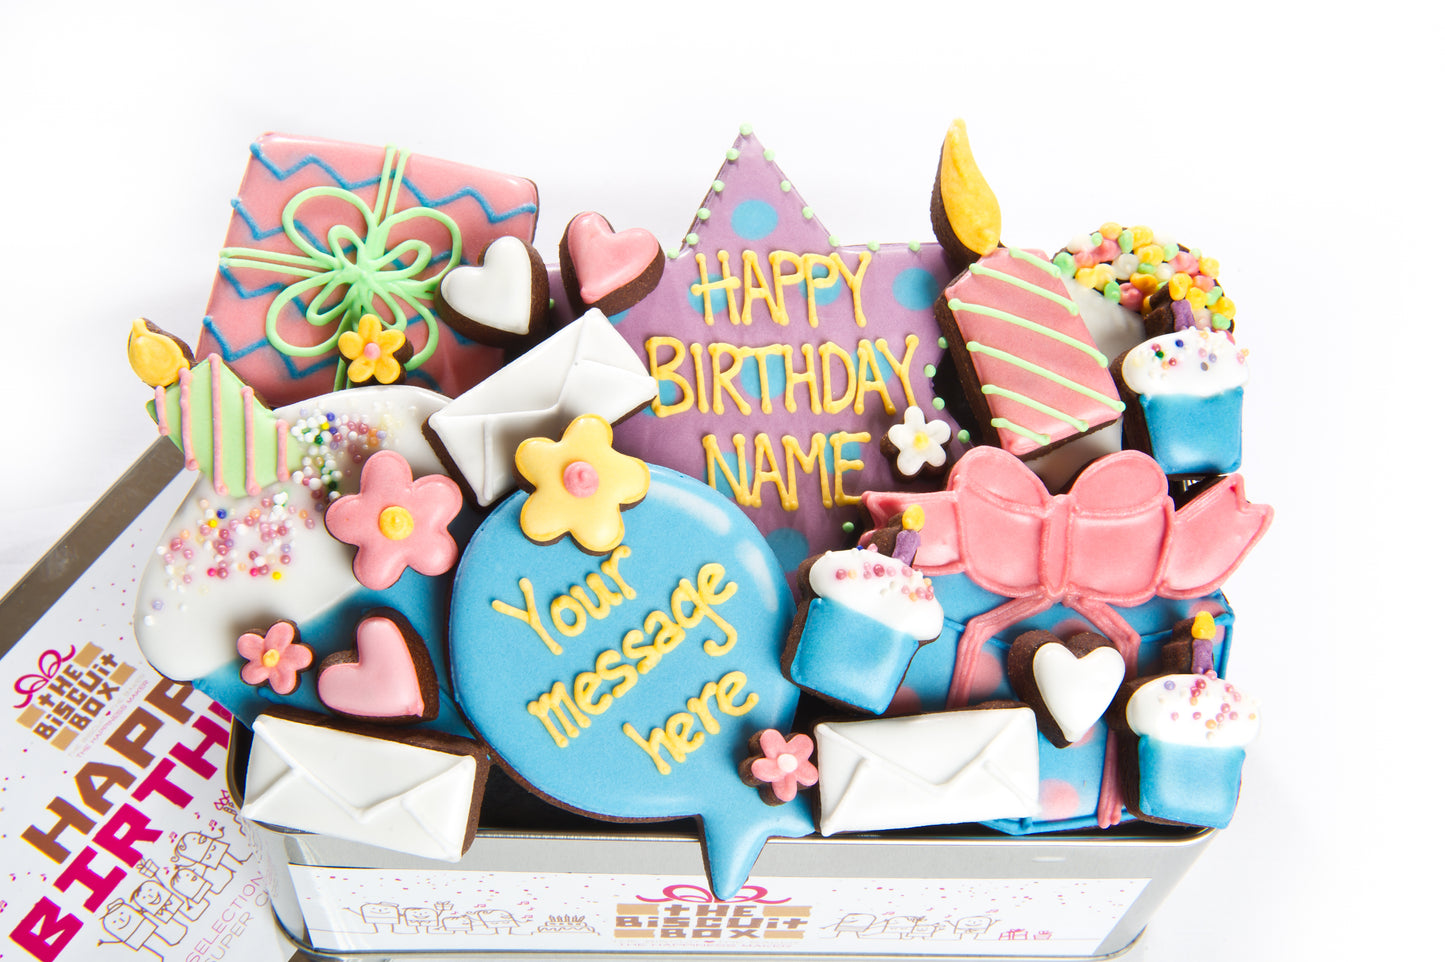 birthday biscuit gift in a tin. Hand iced birthday selection of biscuits, personals 18th birthday, 21st birthday, 50th birthday on the balloon biscuit. Happy birthday message.